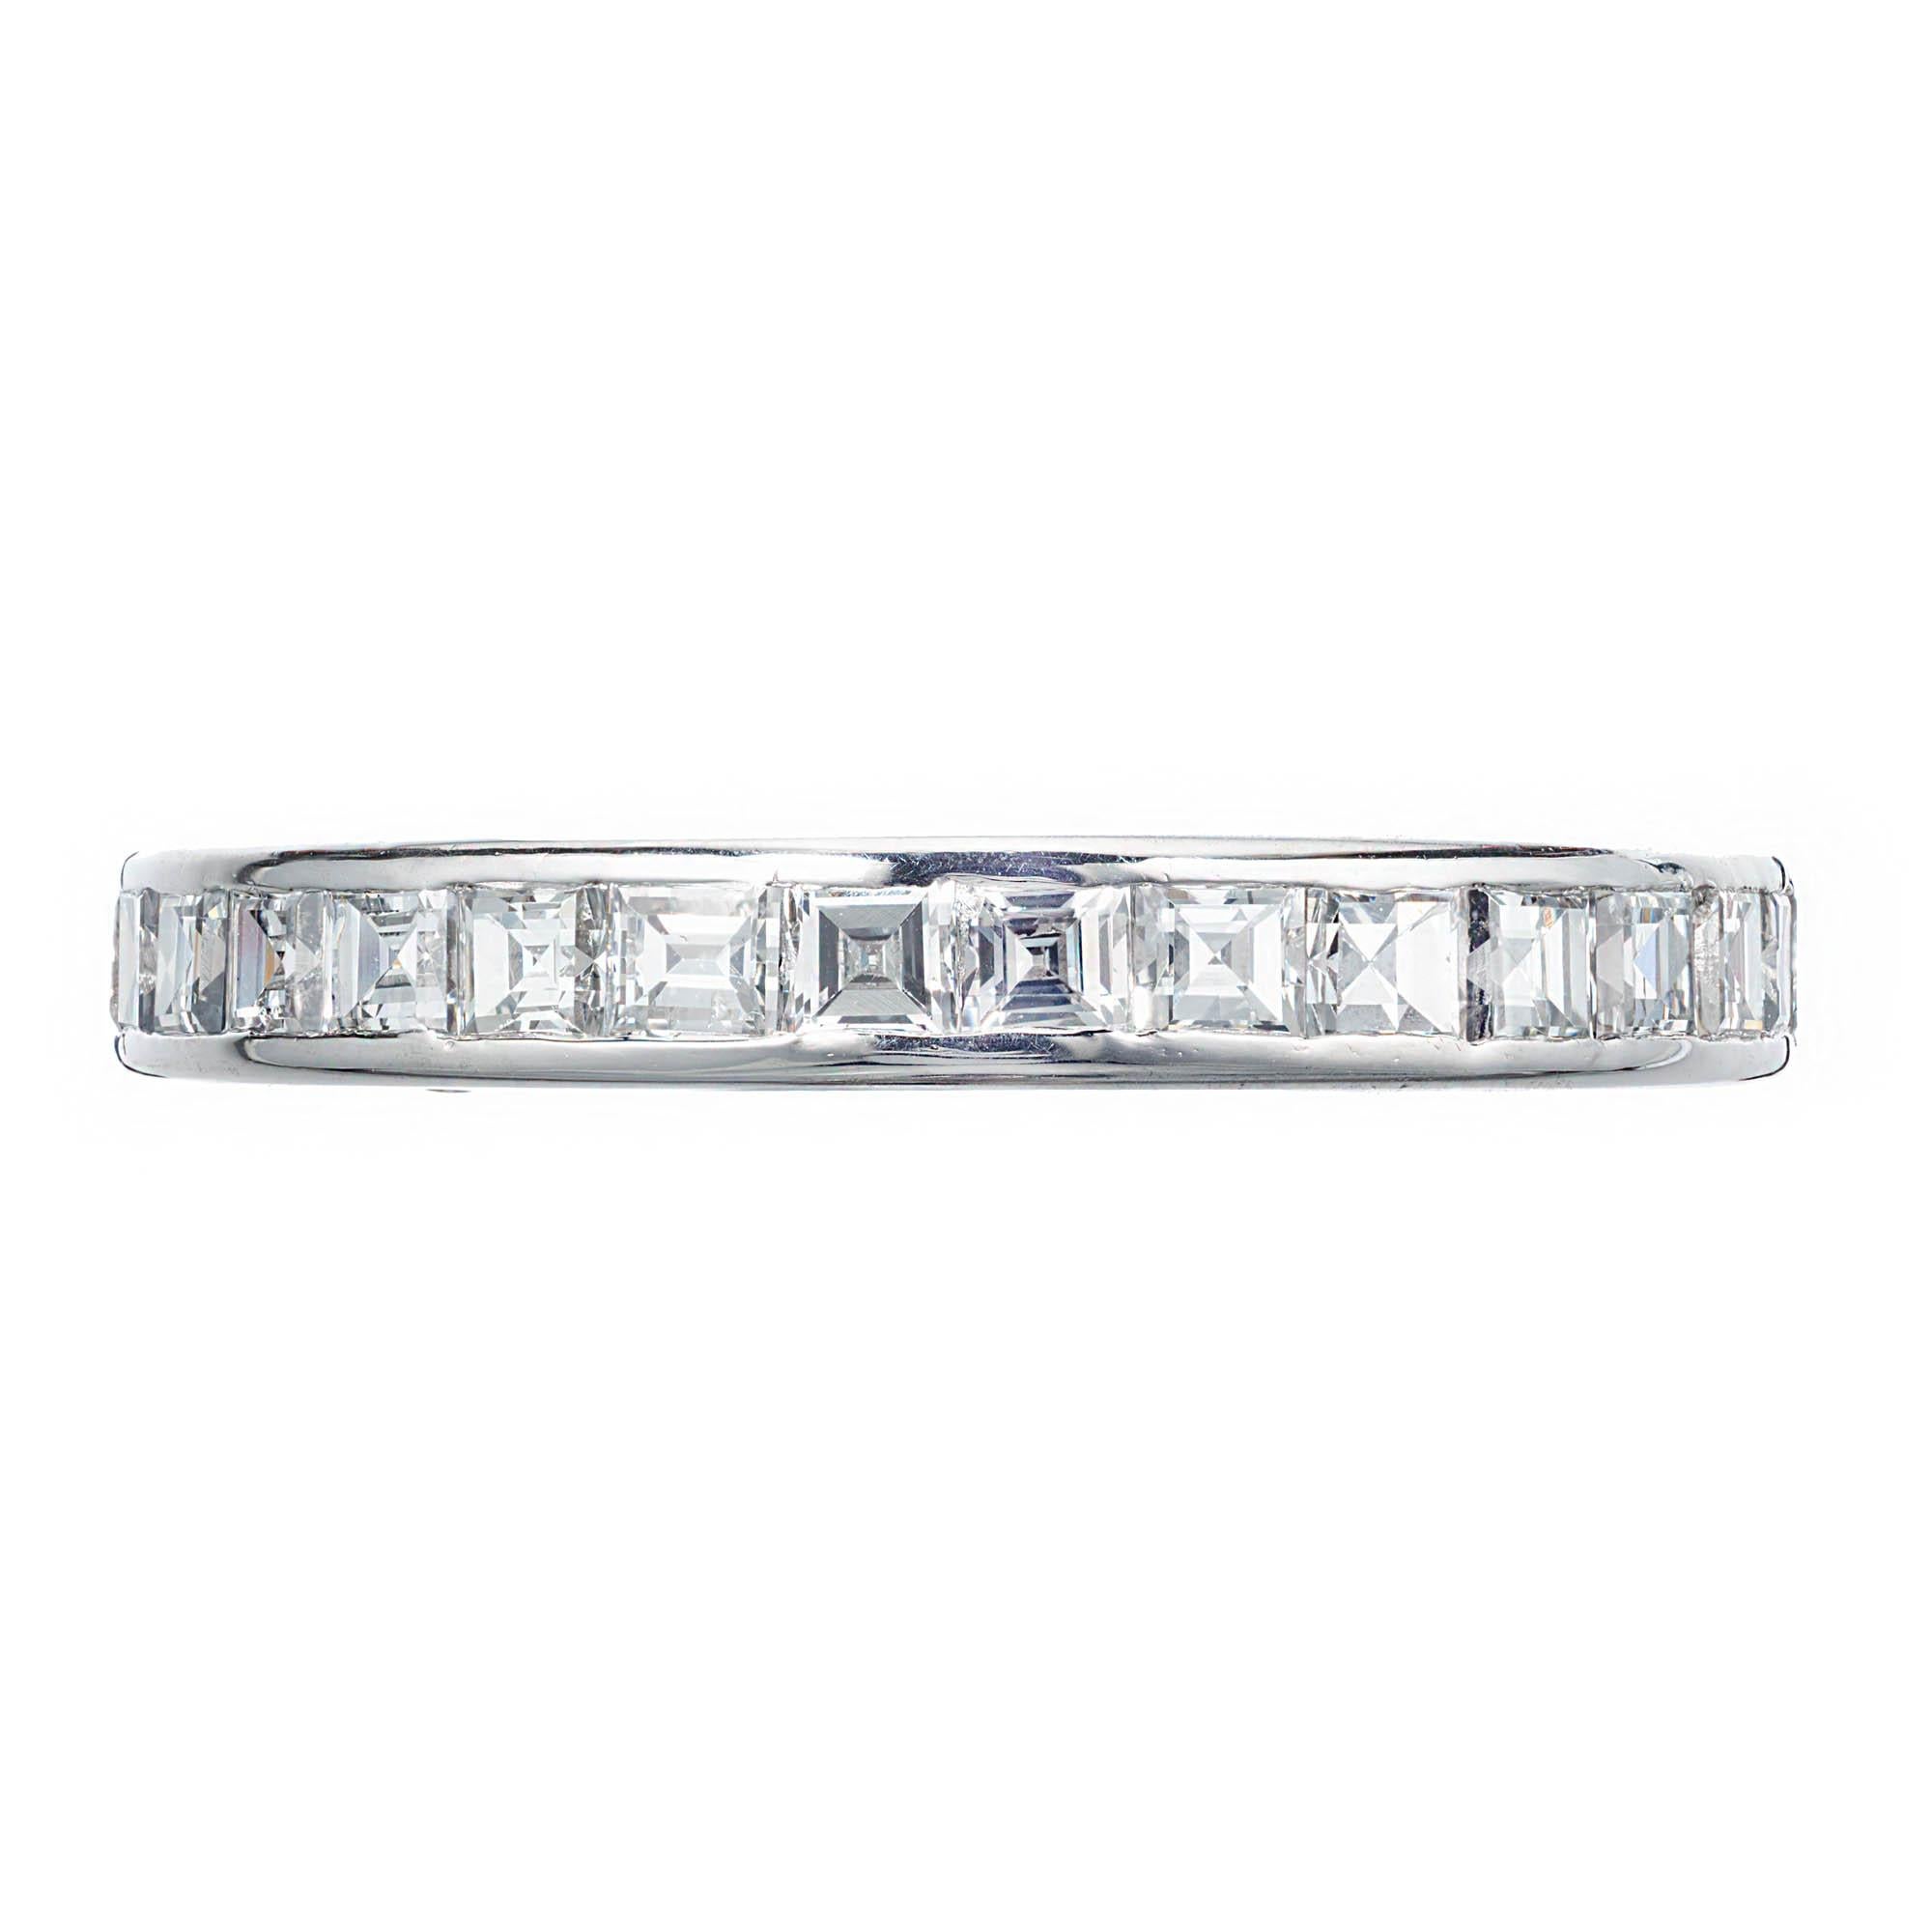 Peter Suchy channel set diamond eternity band with Art Deco style square step cut diamonds in a platinum setting, crafted in the Peter Suchy Workshop. 

30 step cut square cut G-H VS diamonds, Approximate 2.00 carats 
Size 7 ¼ and sizable 
Platinum